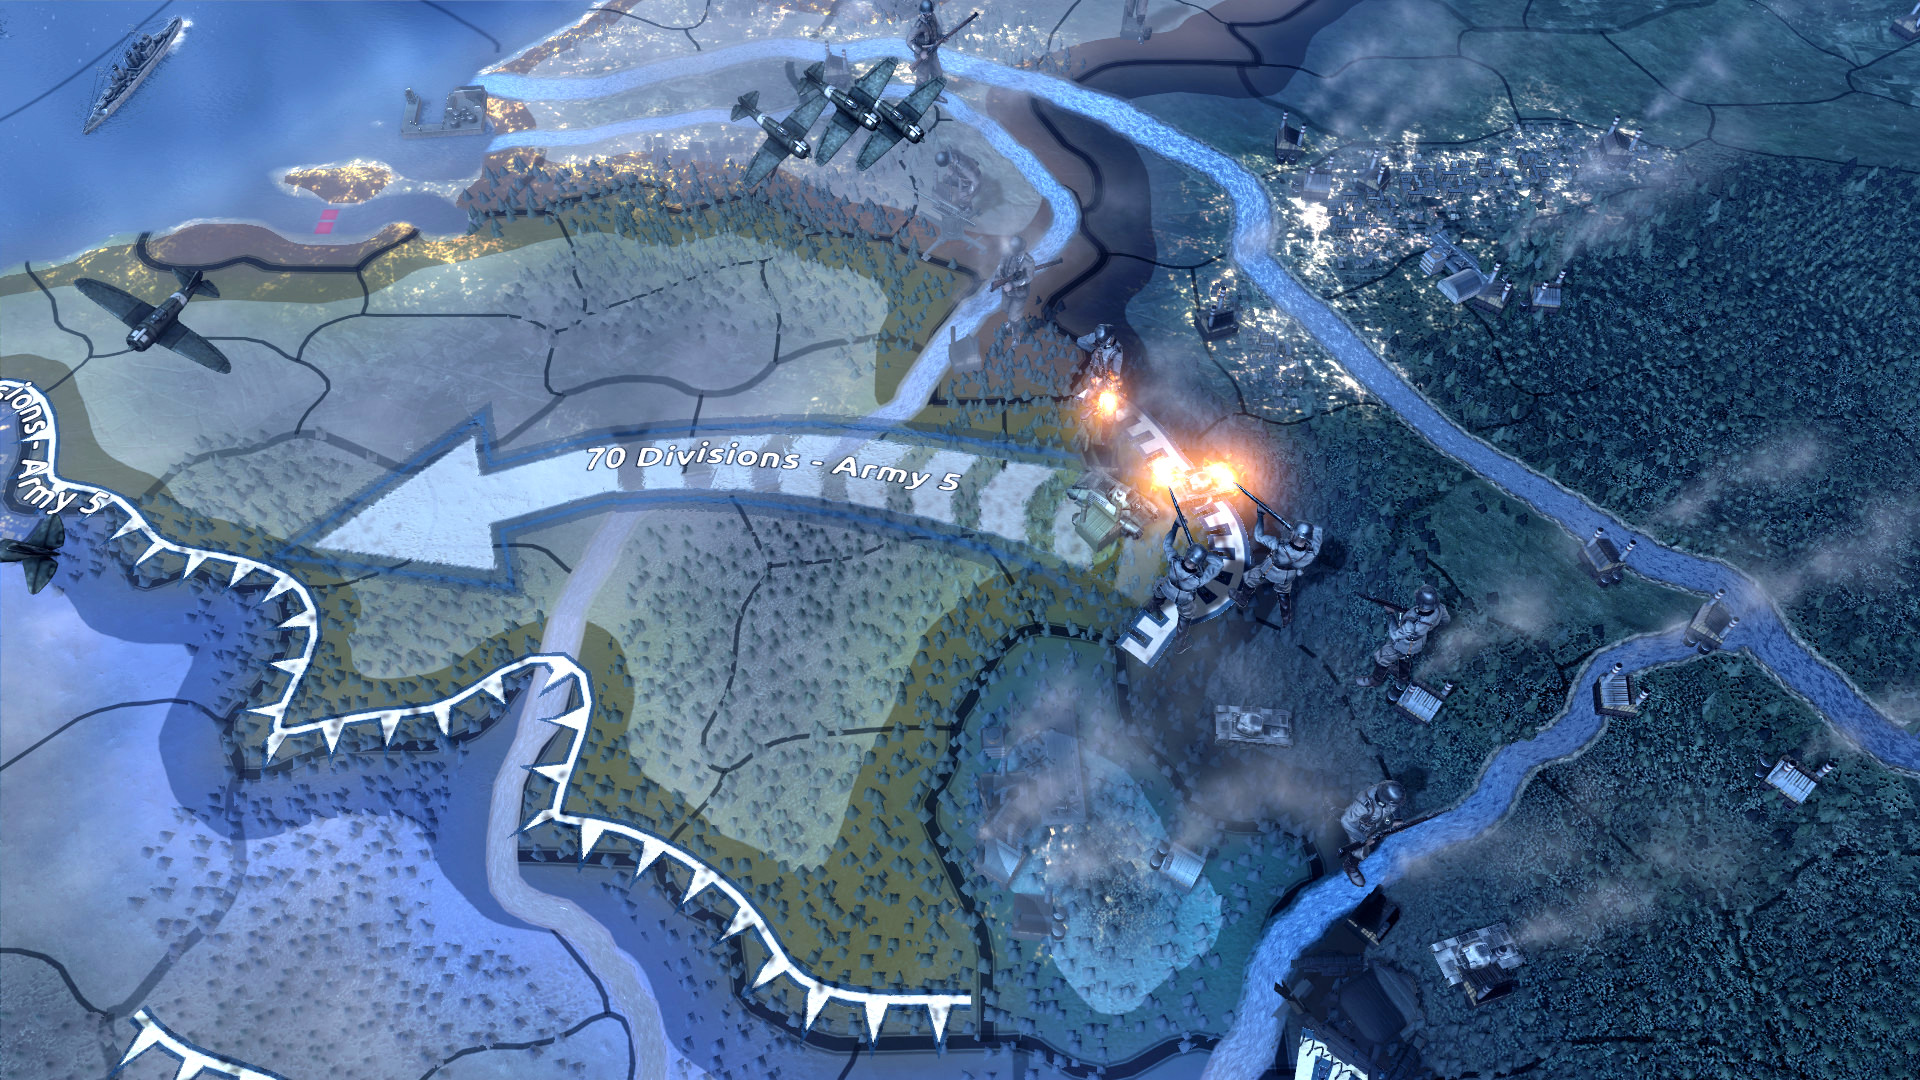 Best war games: Hearts of Iron IV. Image shows a map with military forces moving across it.